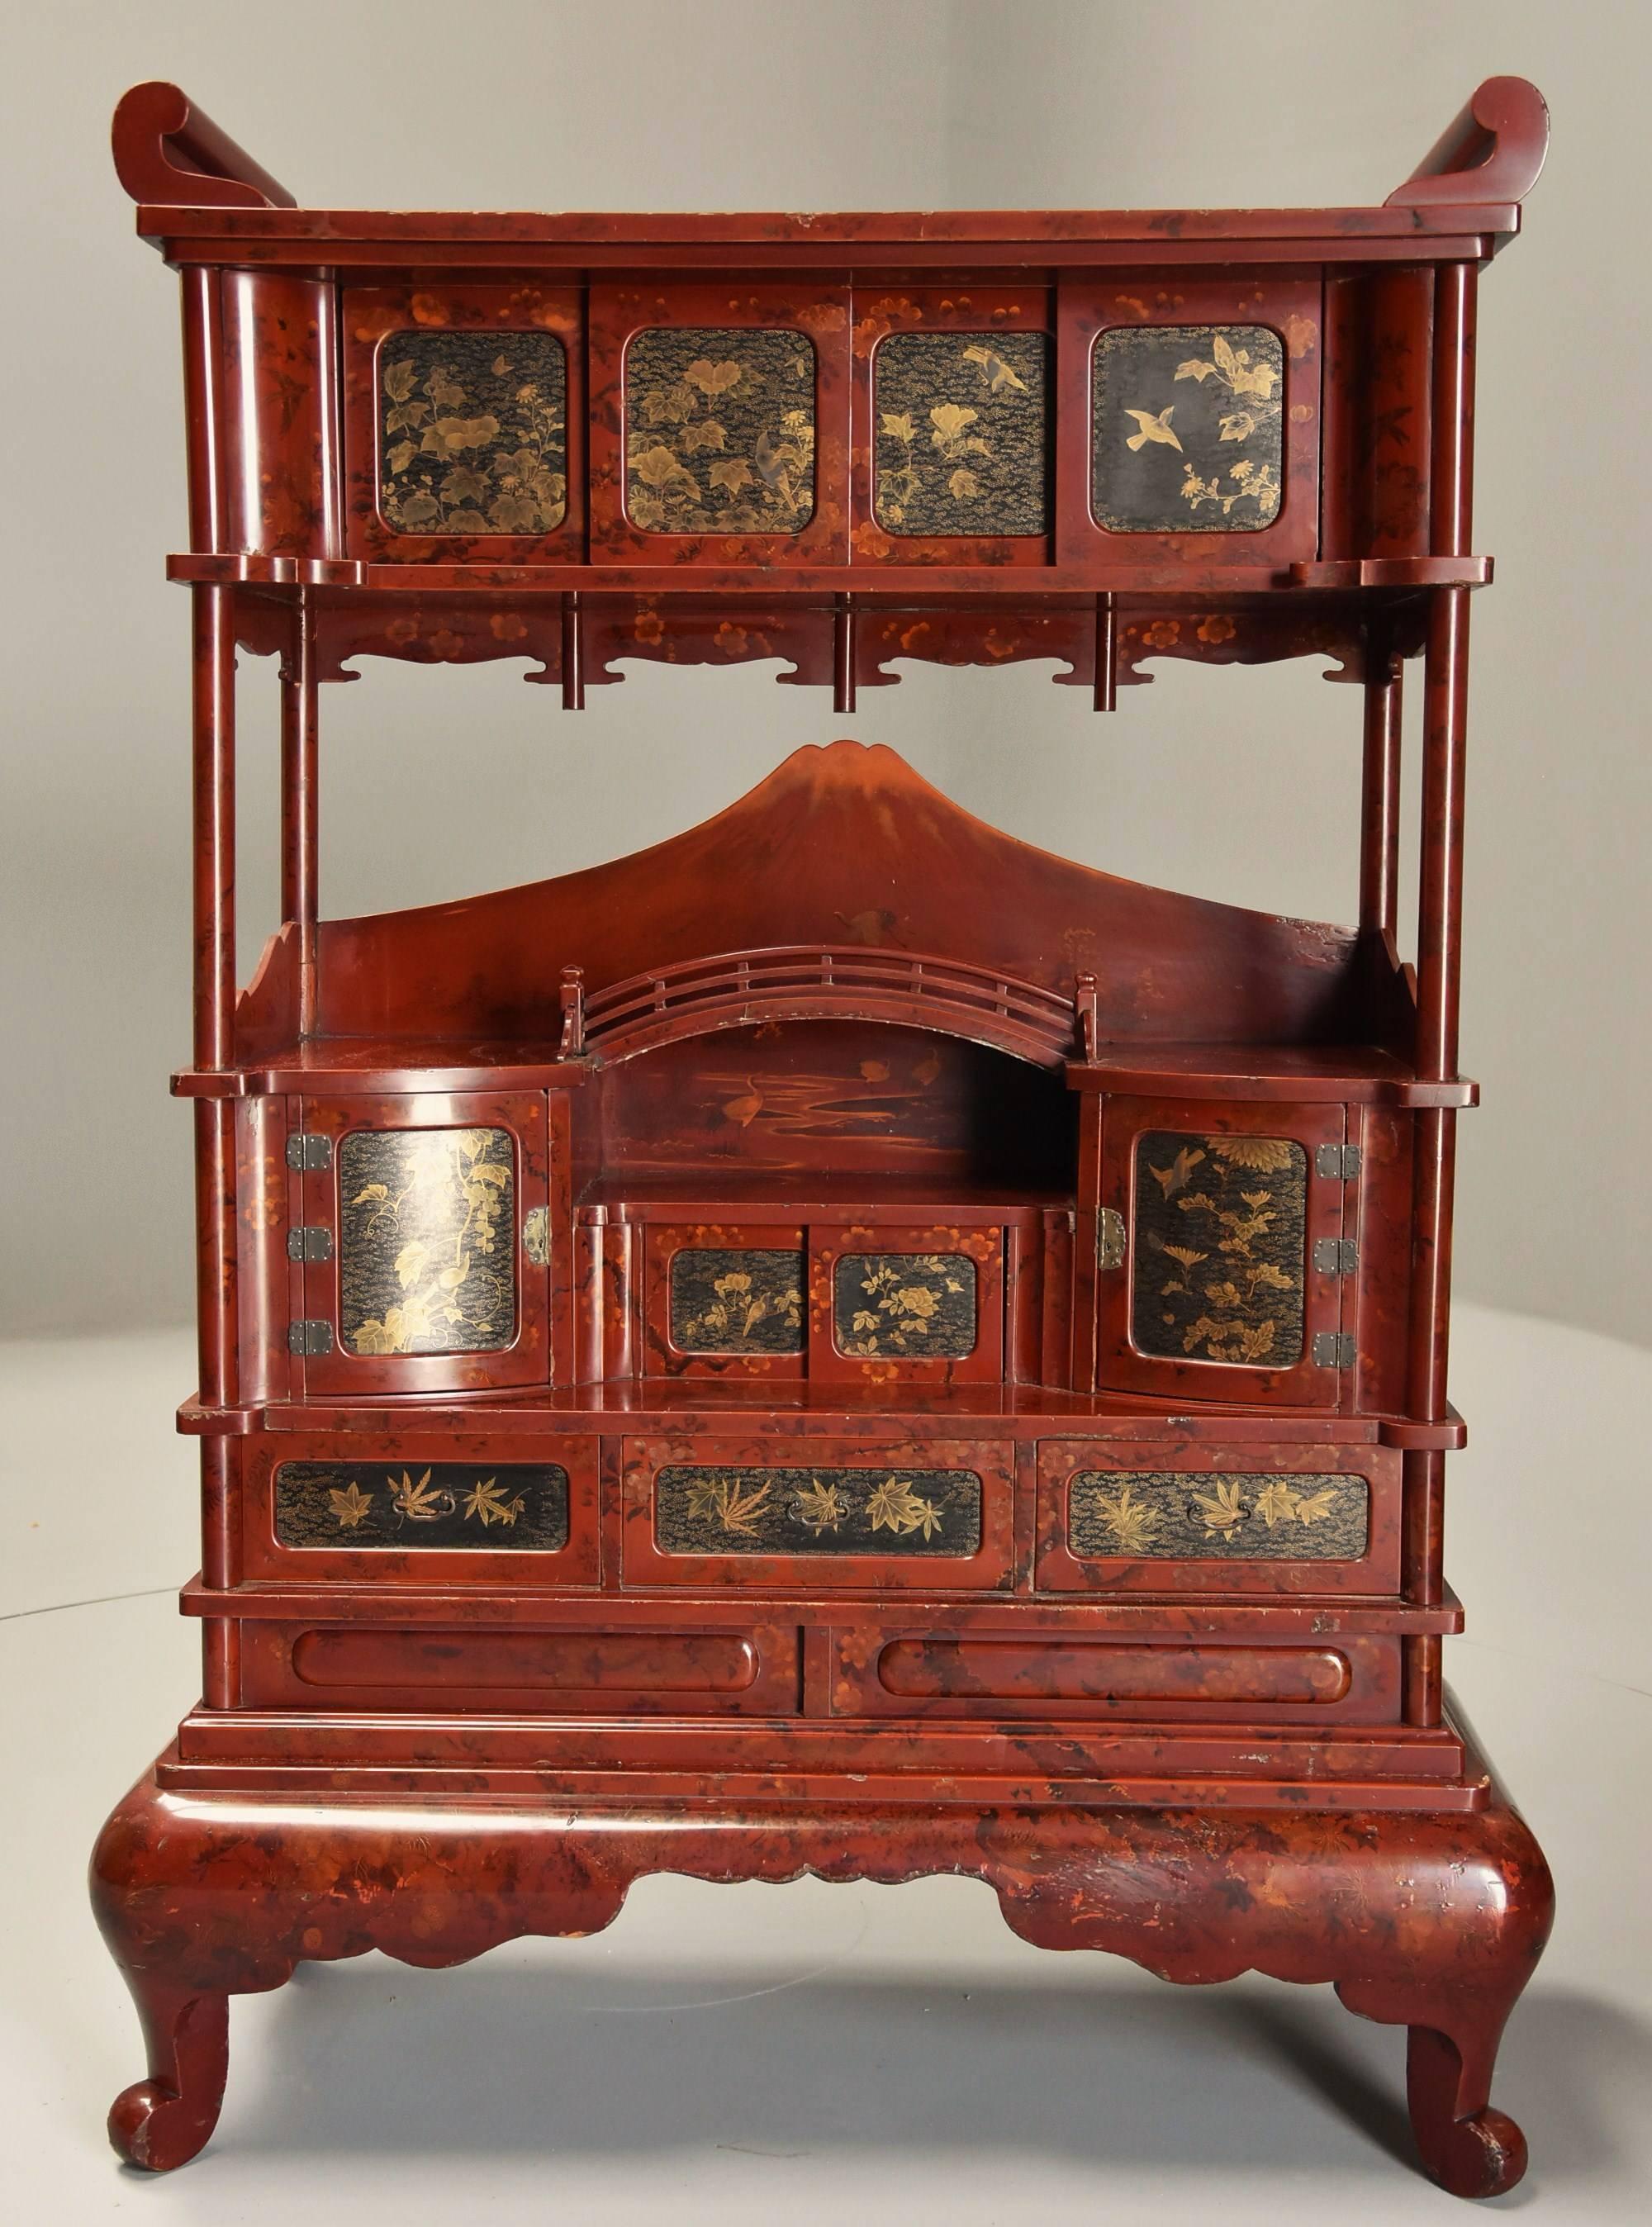 An early 20th century Japanese red lacquered decorative freestanding shodana (cabinet).

The body of this shodana is finished in a red lacquer with tree, flower, foliate and bird decoration to the front, sides and back making this a freestanding